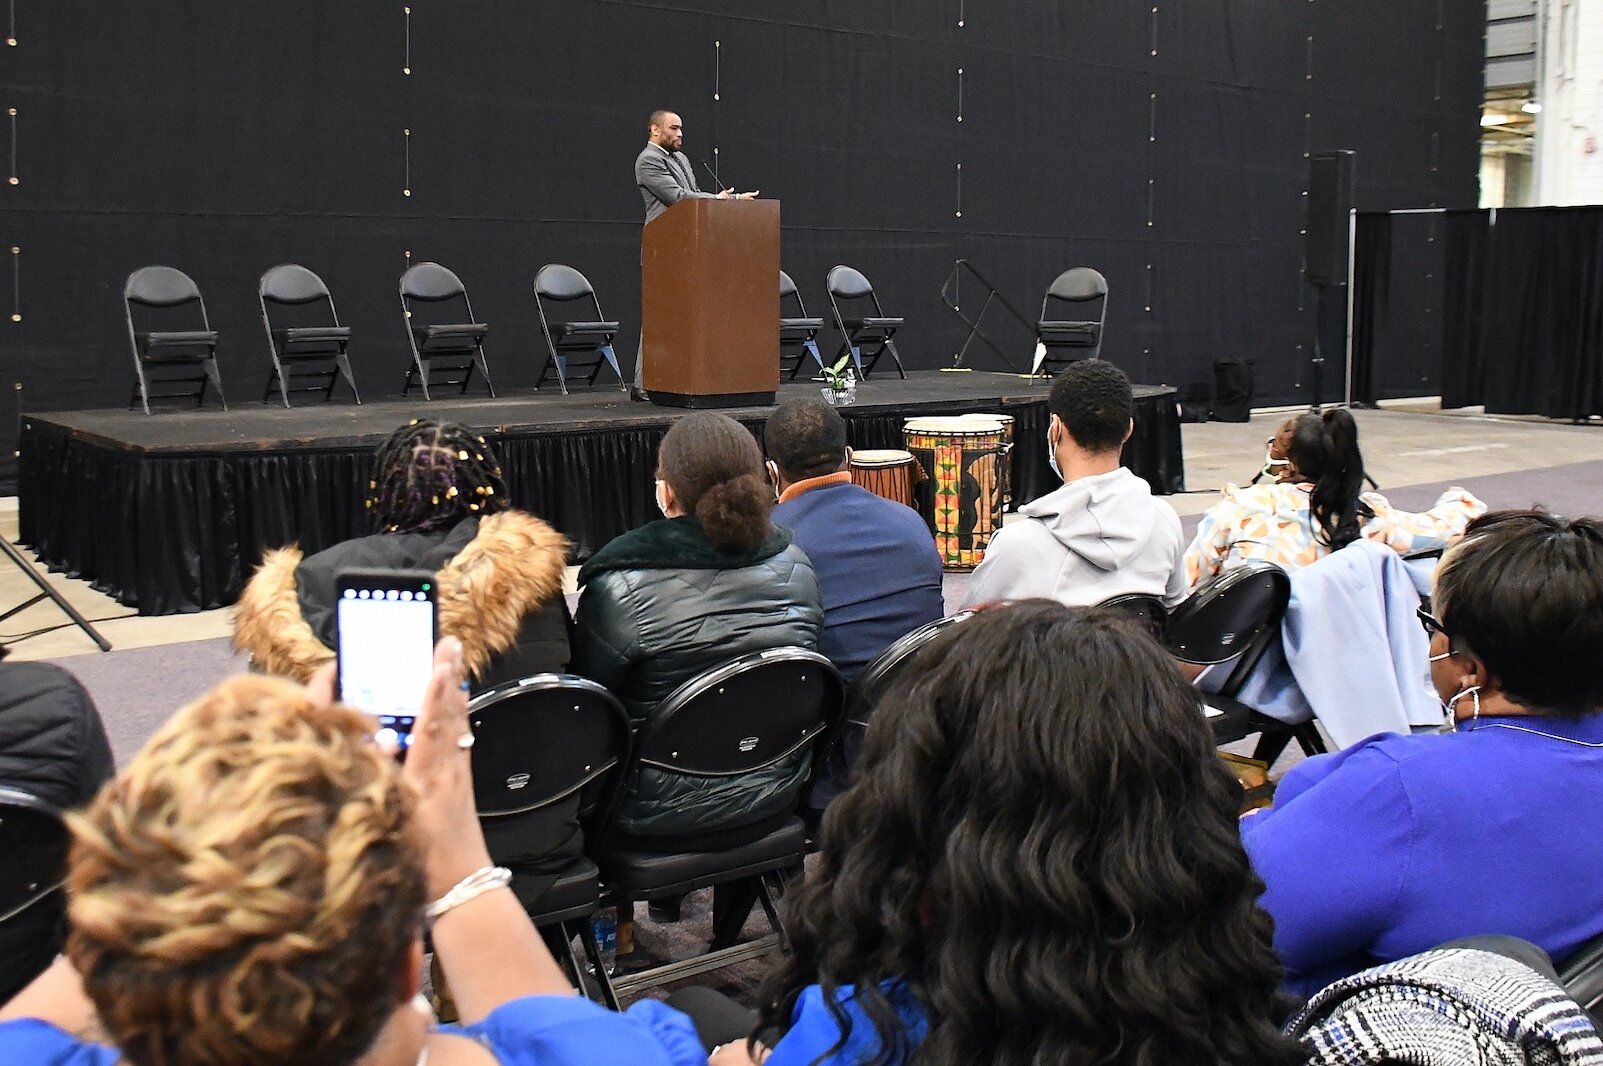 Dr. Marc Lamont Hill gives the keynote address during Monday’s “We, Us, Our: 55 Shades of Black” commemoration of Martin Luther King, Jr’s birthday sponsored by the Southwestern Michigan Urban League at Kellogg Arena.